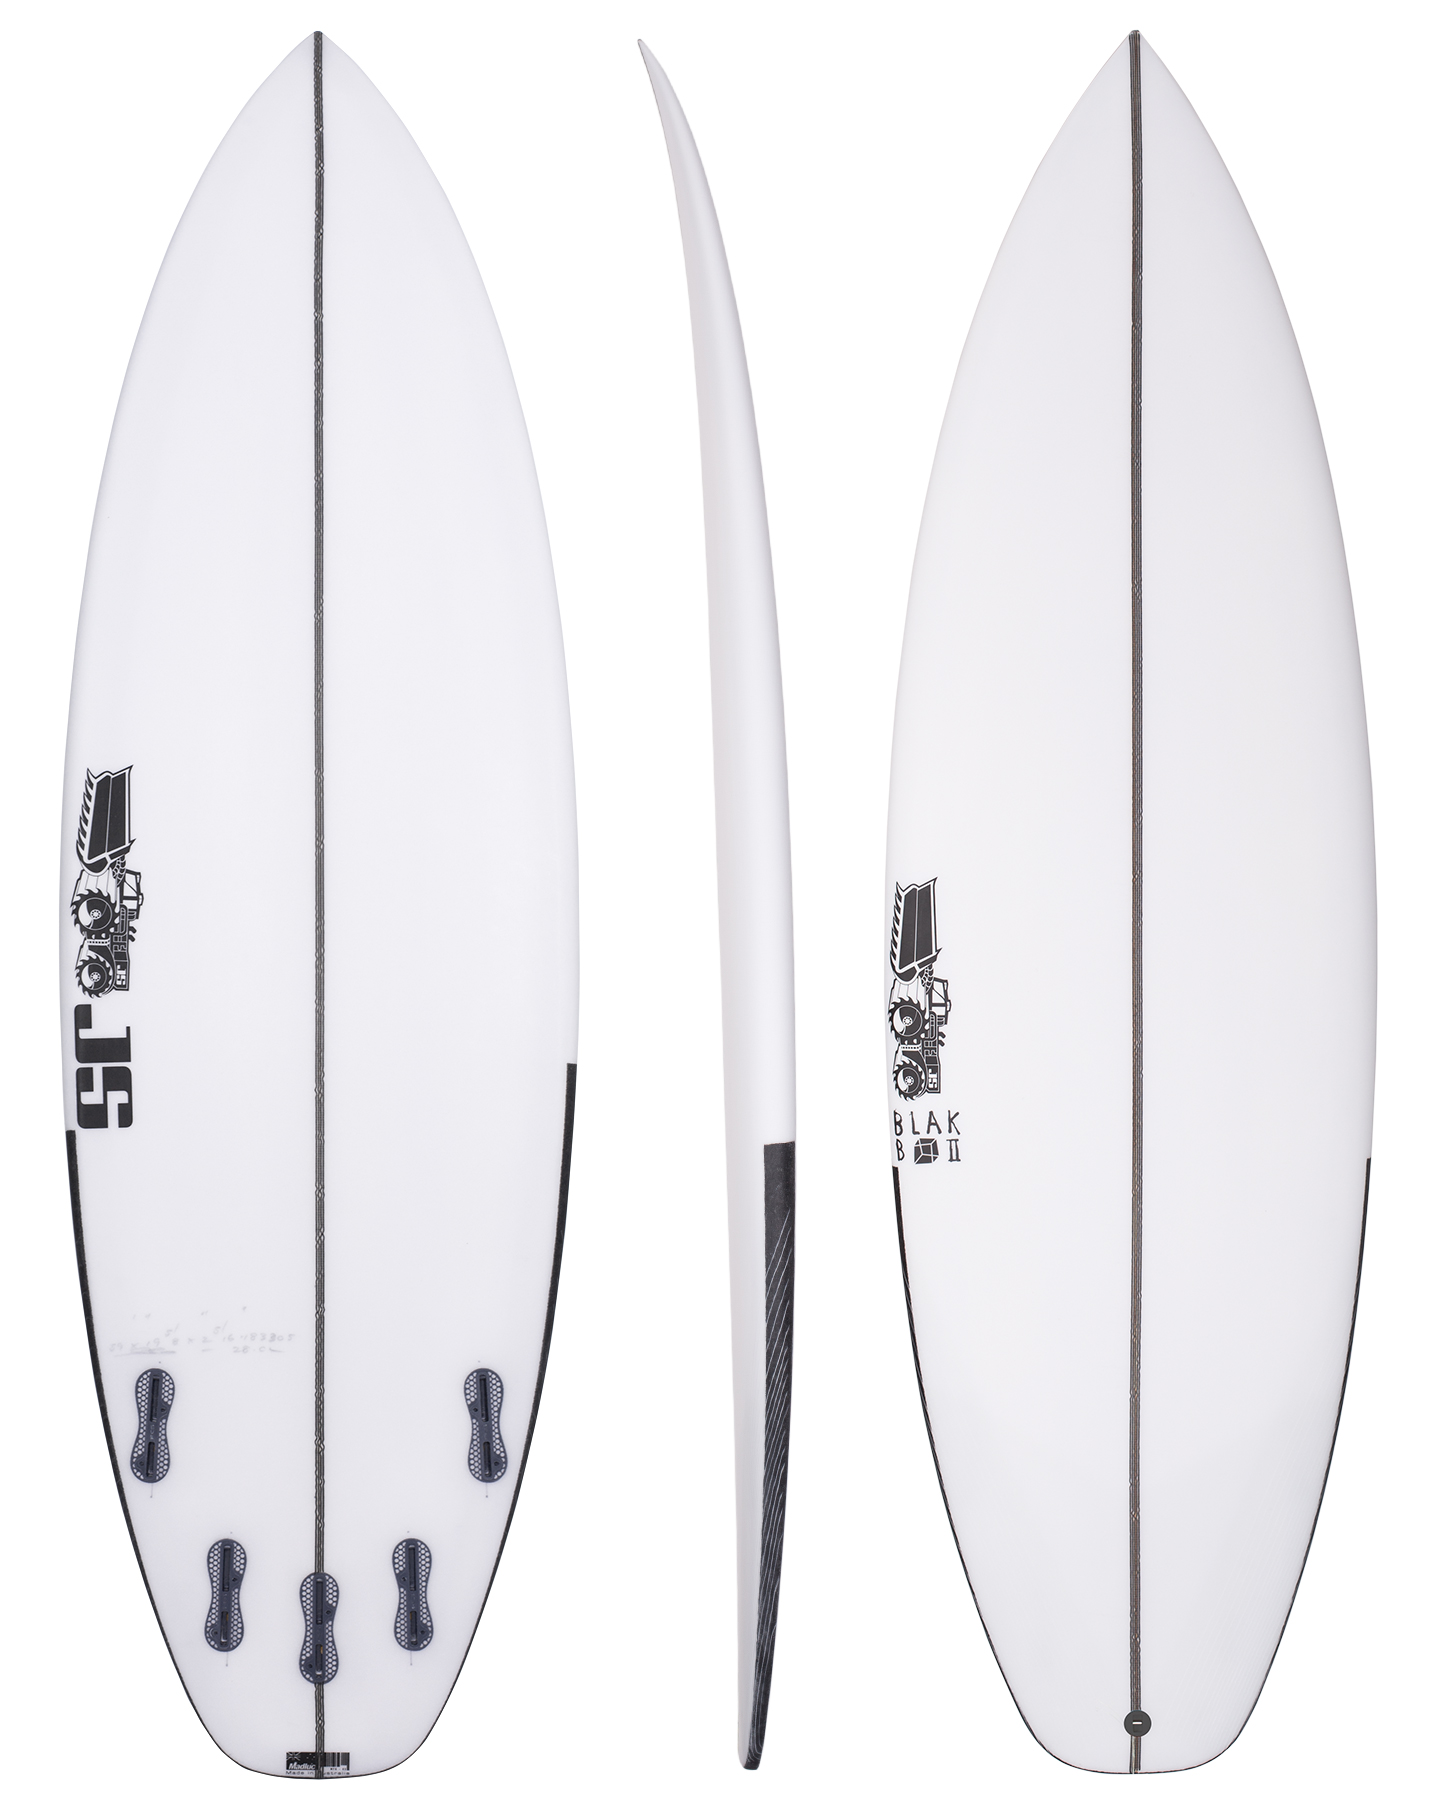 JS INDUSTRIES MONSTA 8 ROUND TAIL - For Sale - Best Price 